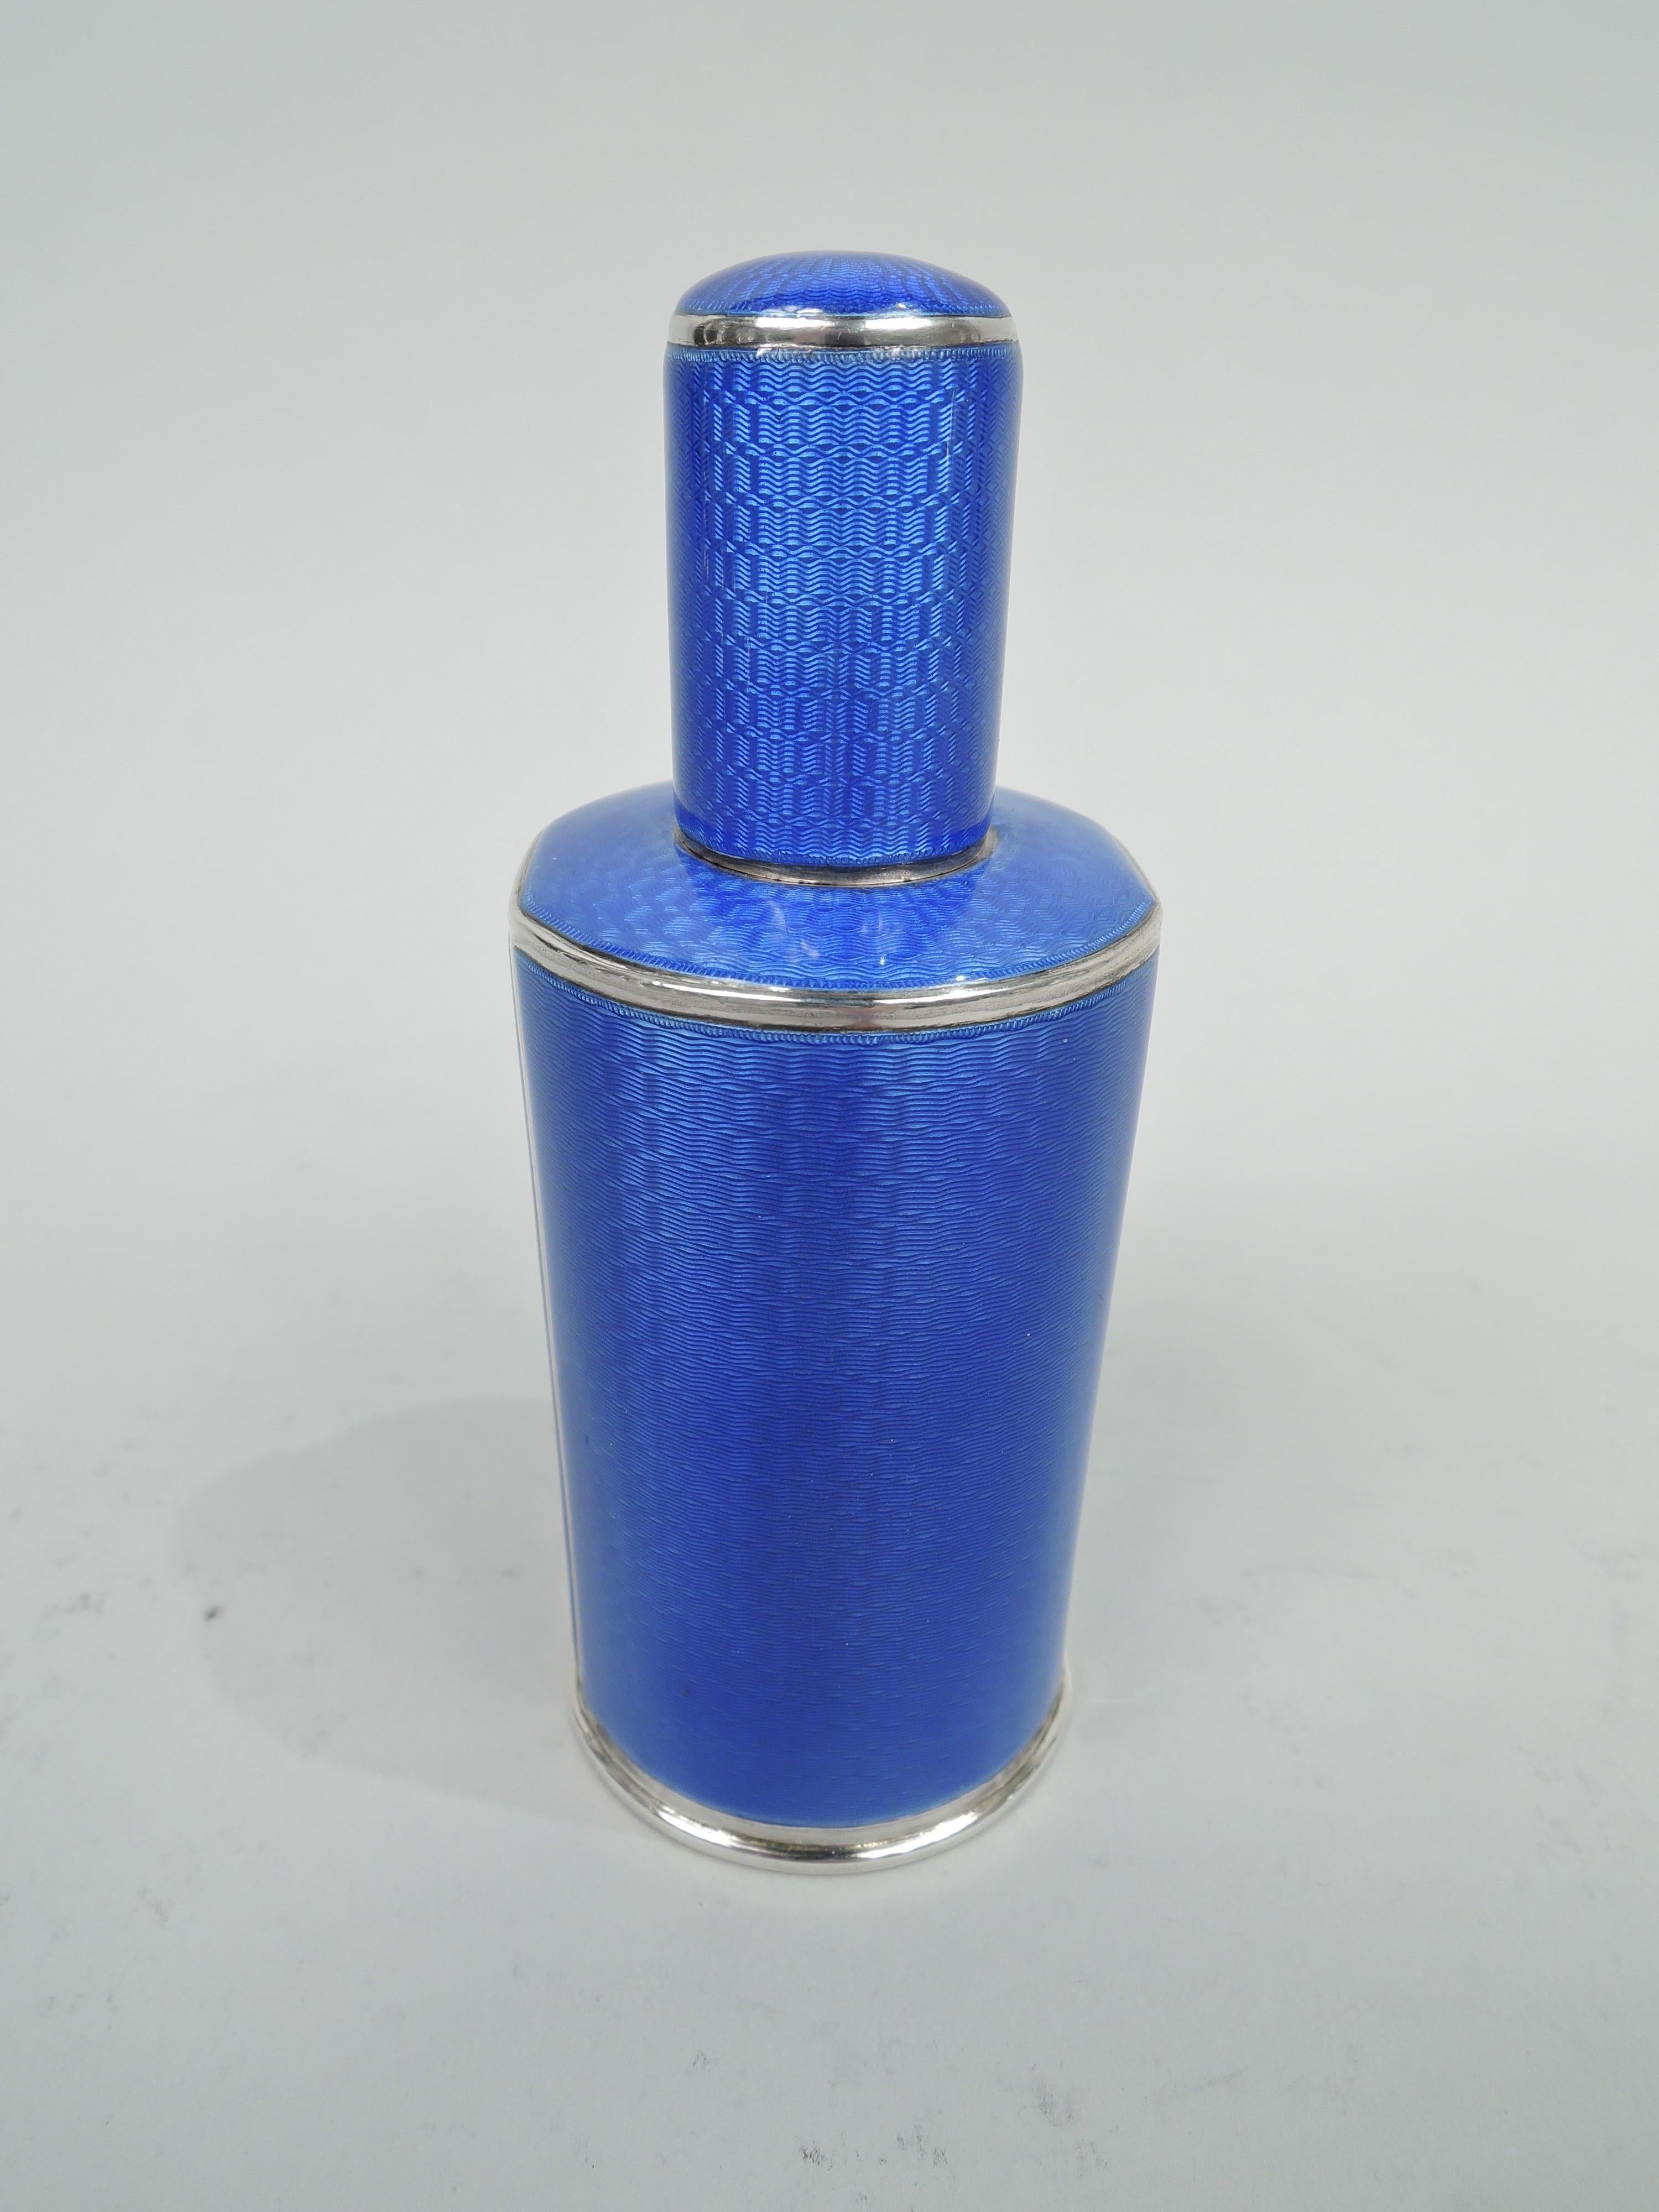 George V sterling silver perfume. Made by Adie Bros Ltd in Birmingham in 1930. Round and cylindrical with two easy-grip flattened sides, inset cylindrical neck, and cover. Blue guilloche enamel in sterling silver frames. Detachable clear glass